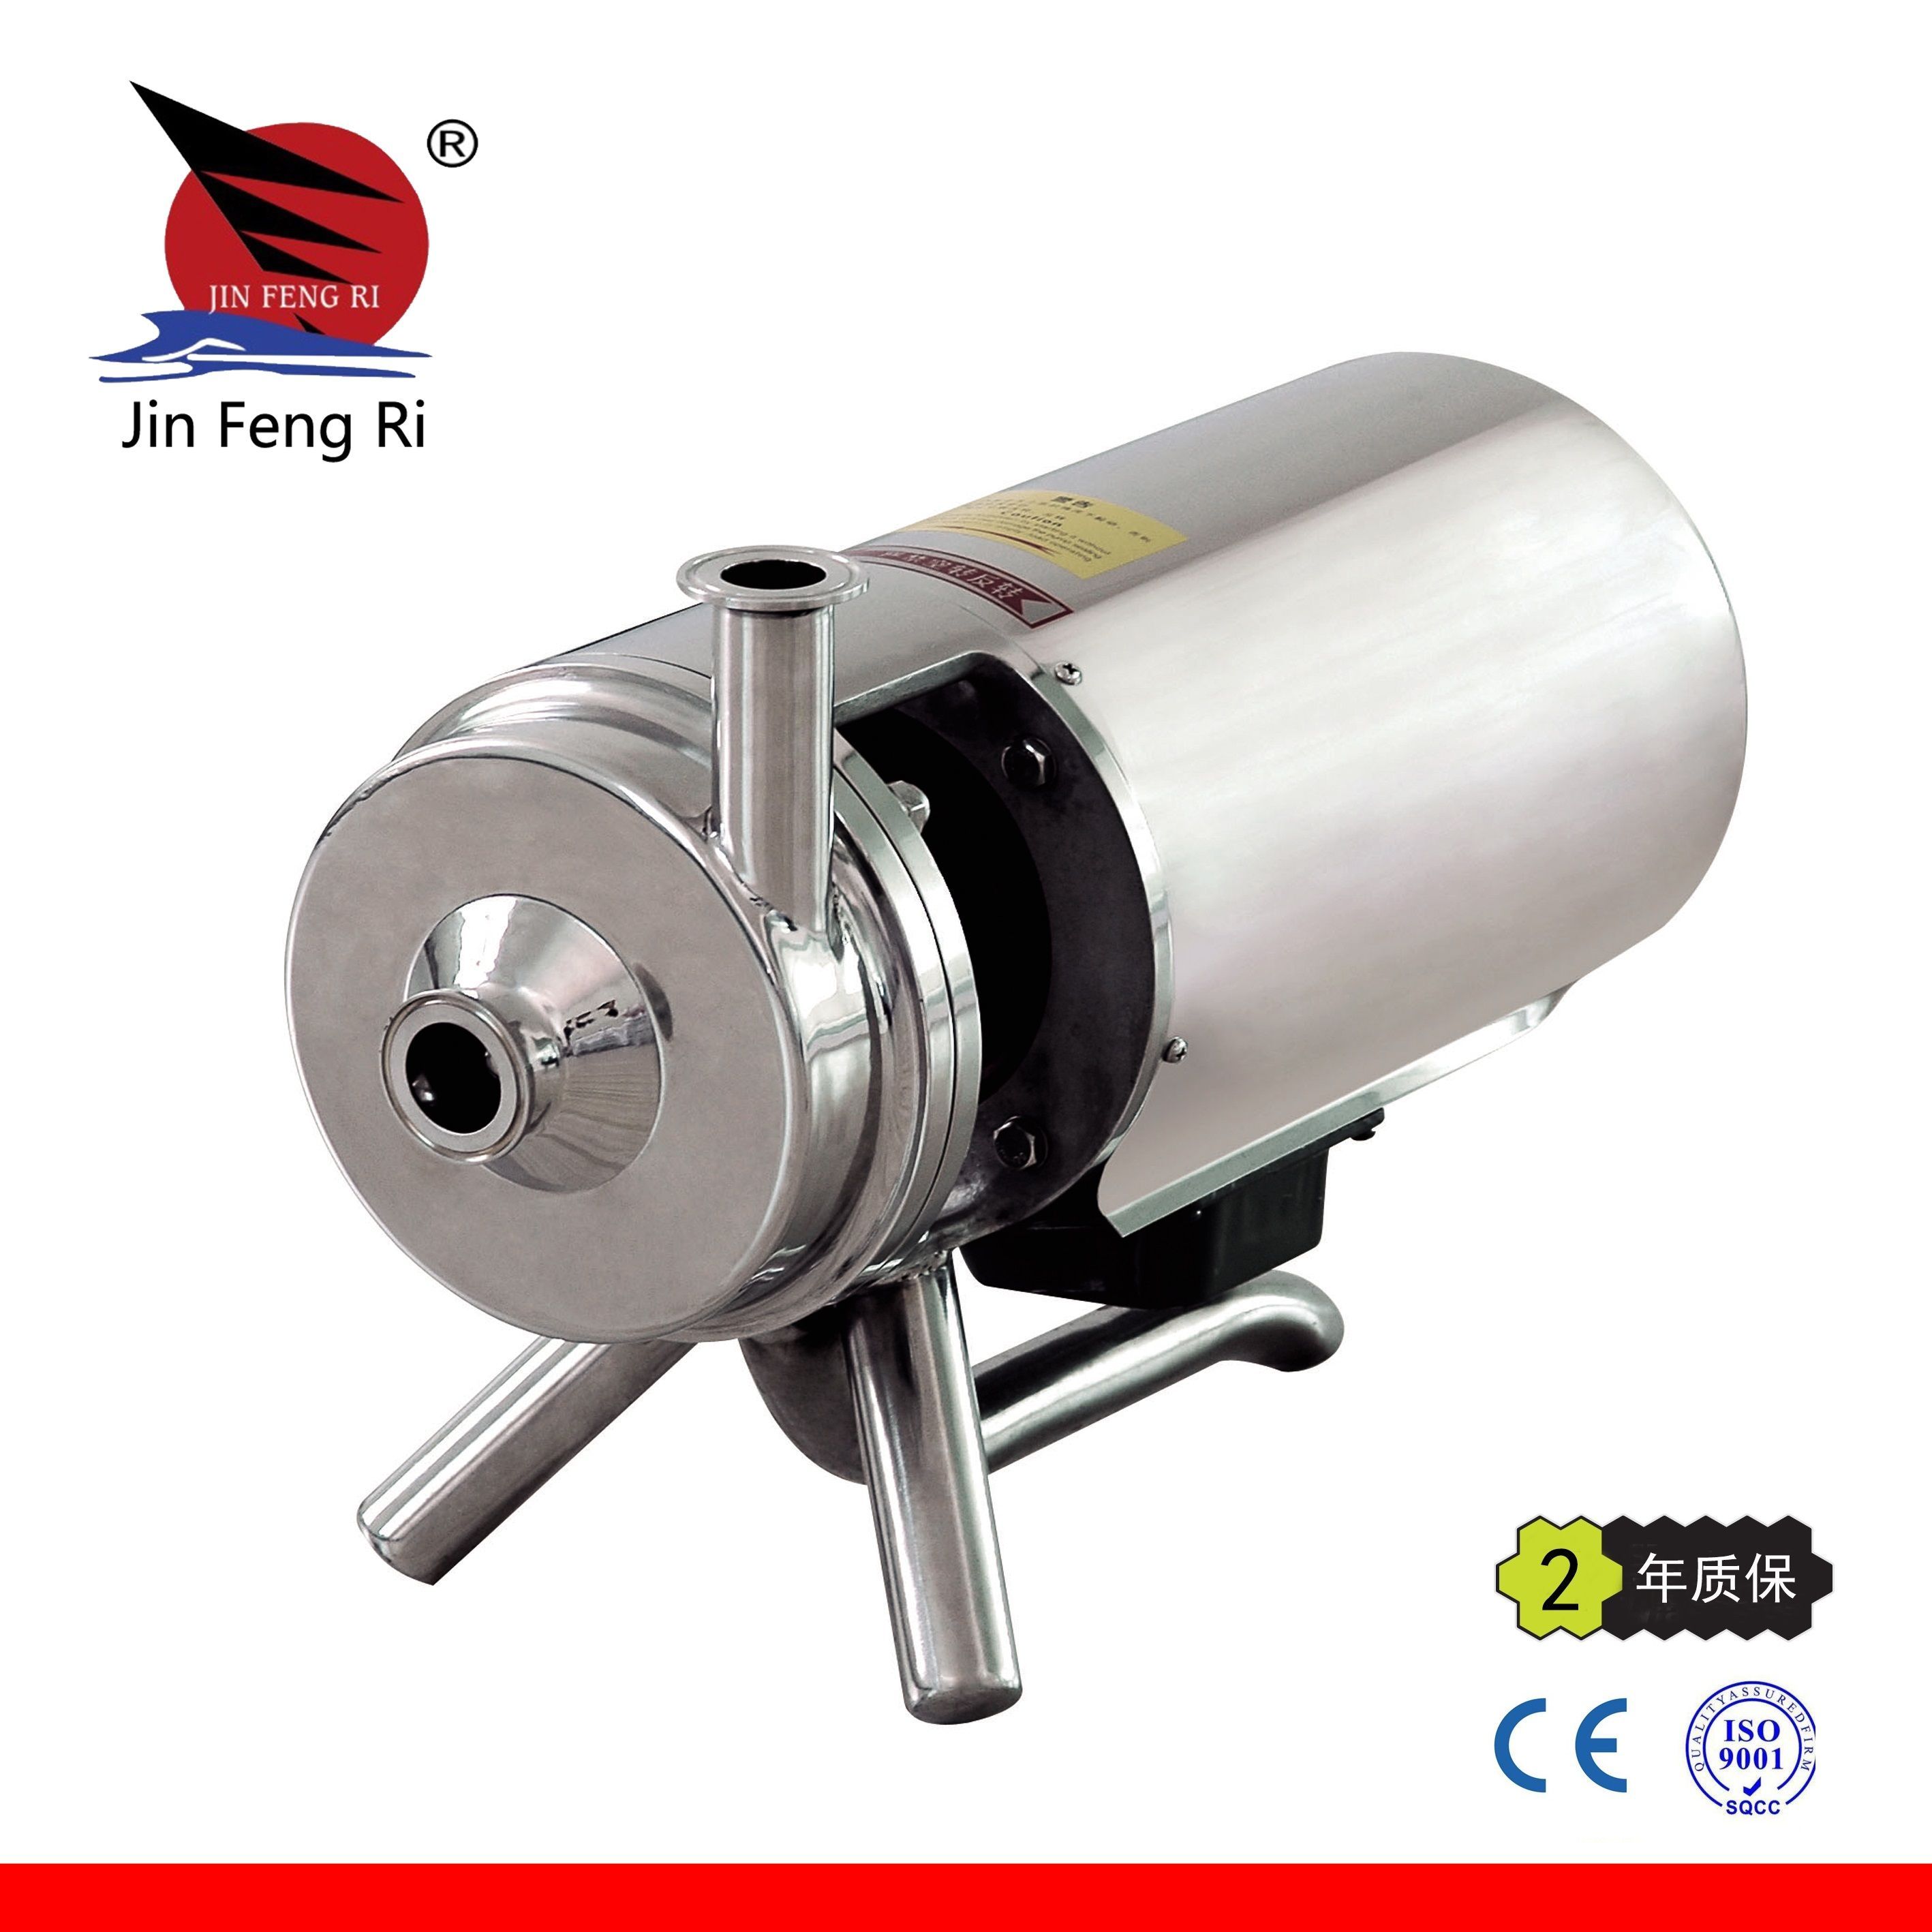 The RP stainless steel sanitary pump